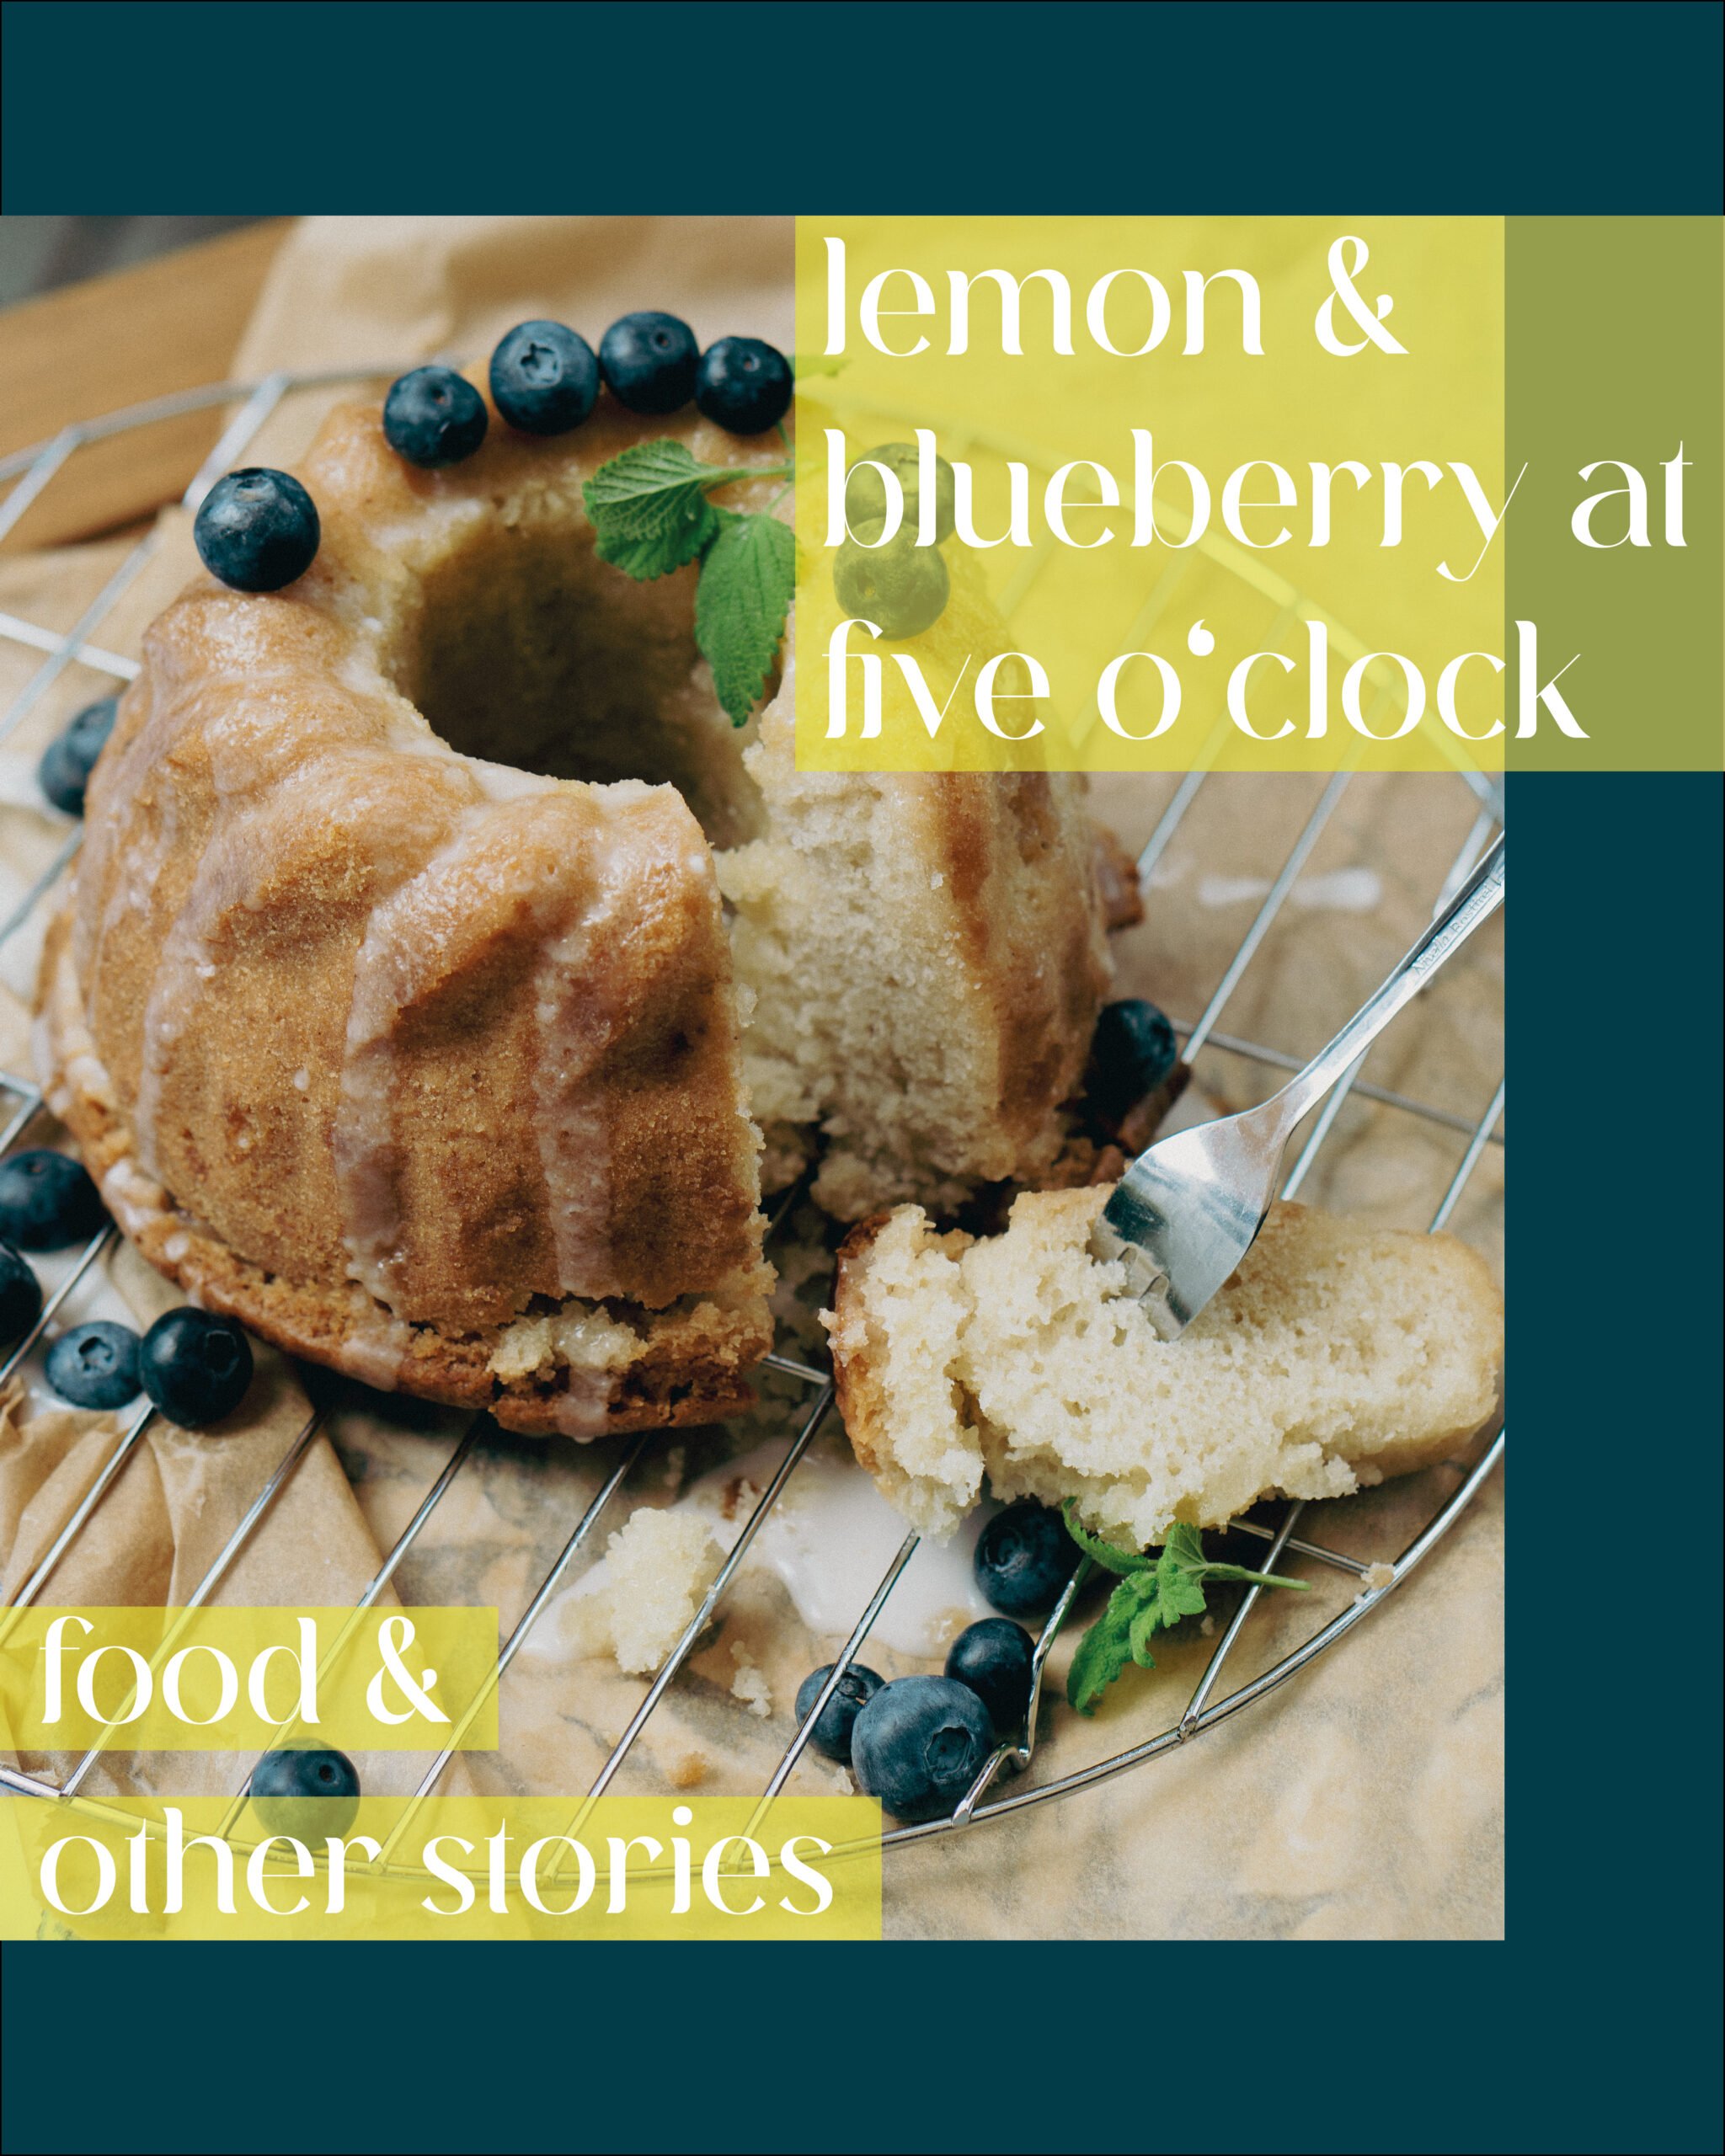 blueberry cupcakes at five o’clock – food & other stories.